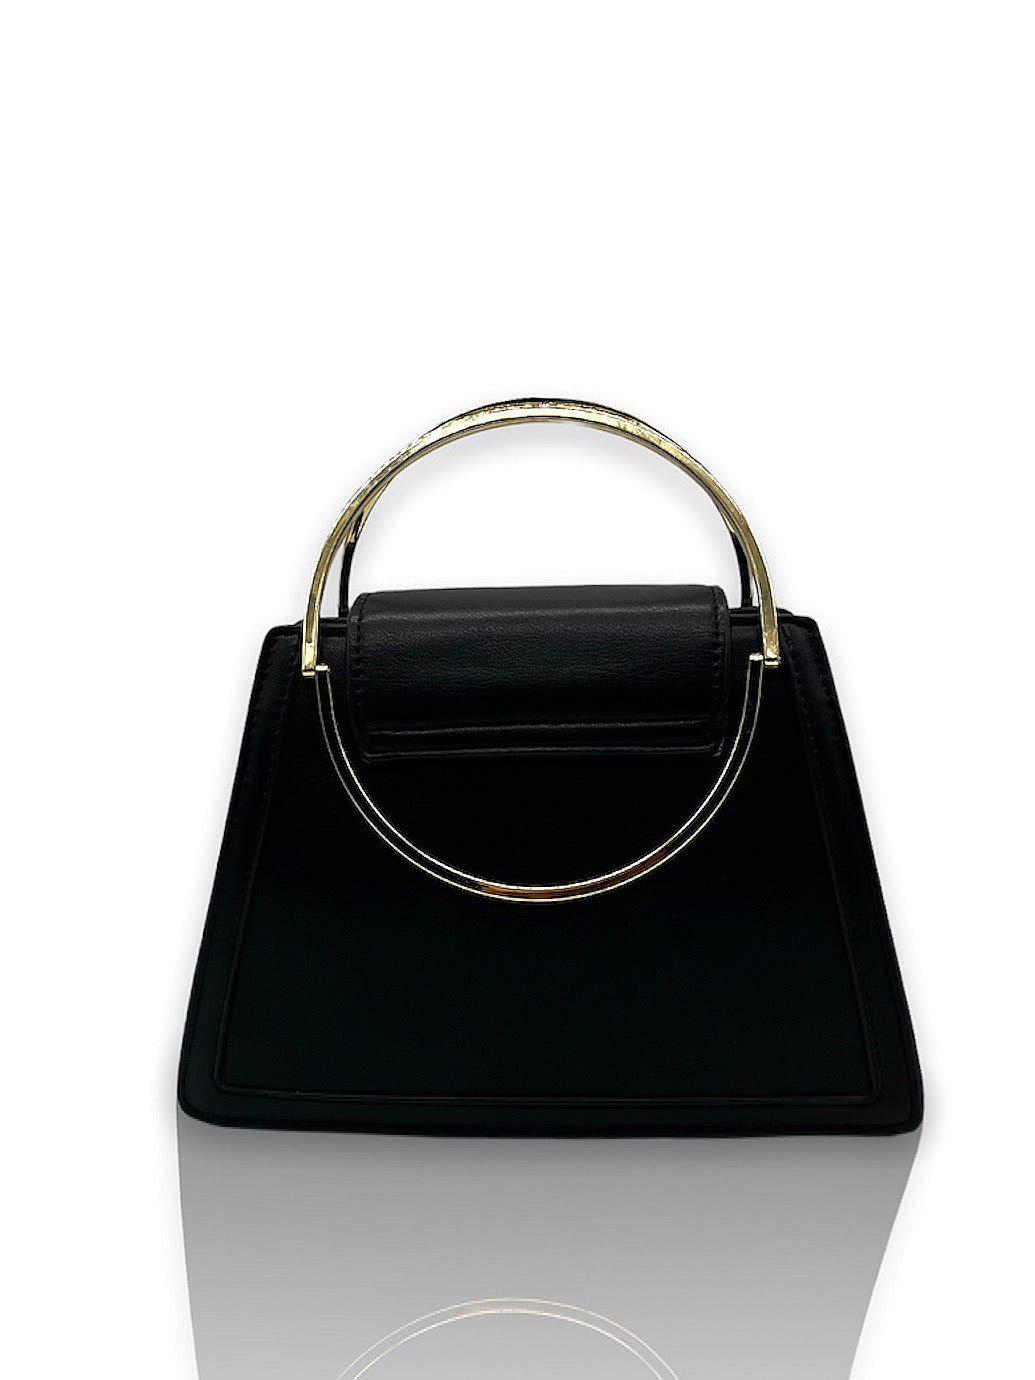 GISSELLE leather top handle bag - onyx black